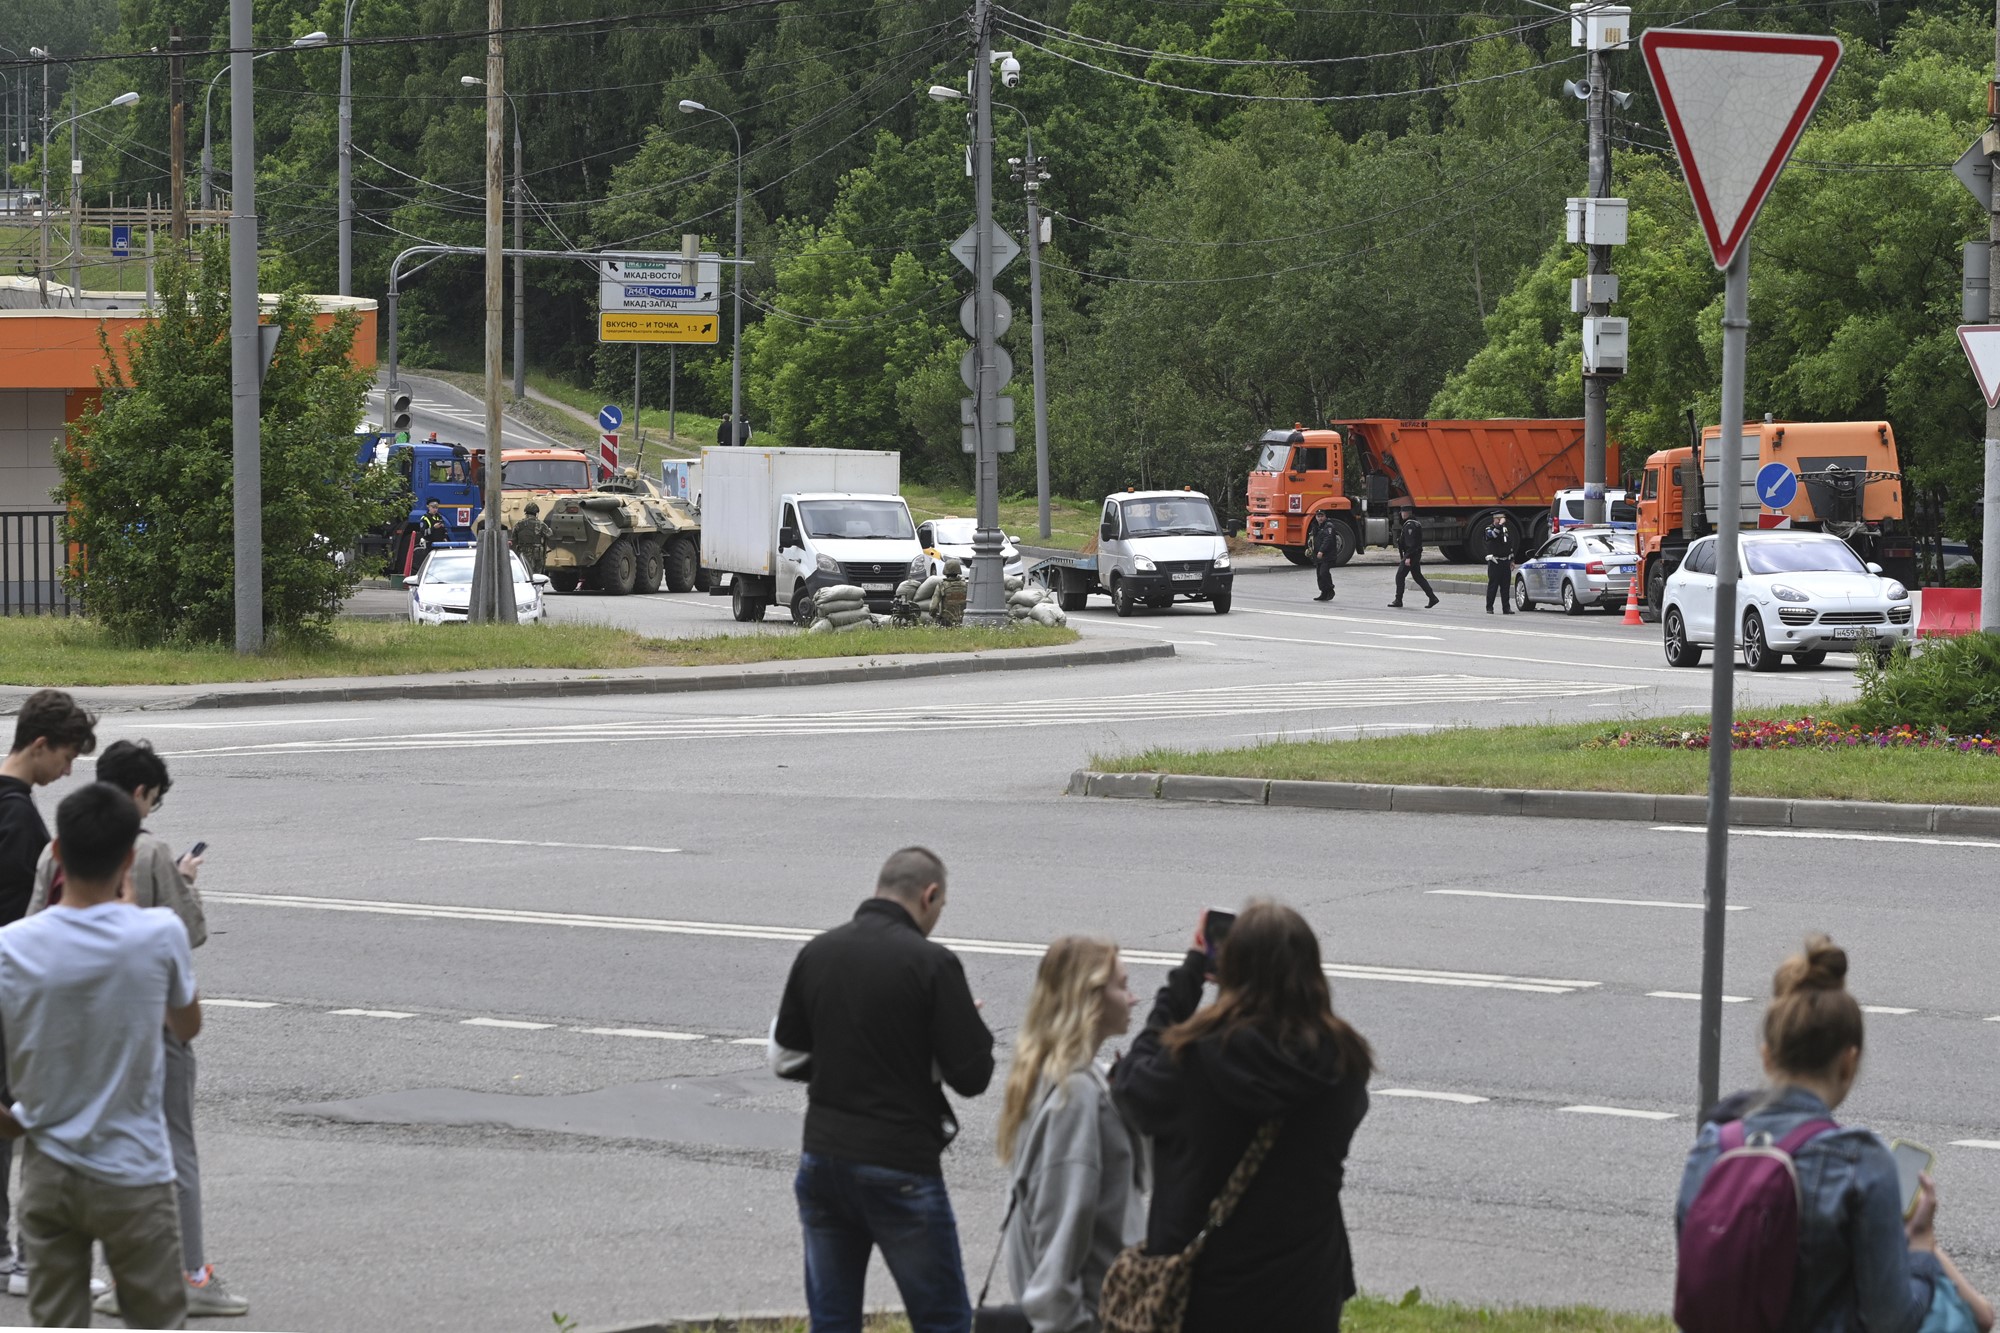 Civilians photograph the roadblock, which is visible from a nearby intersection